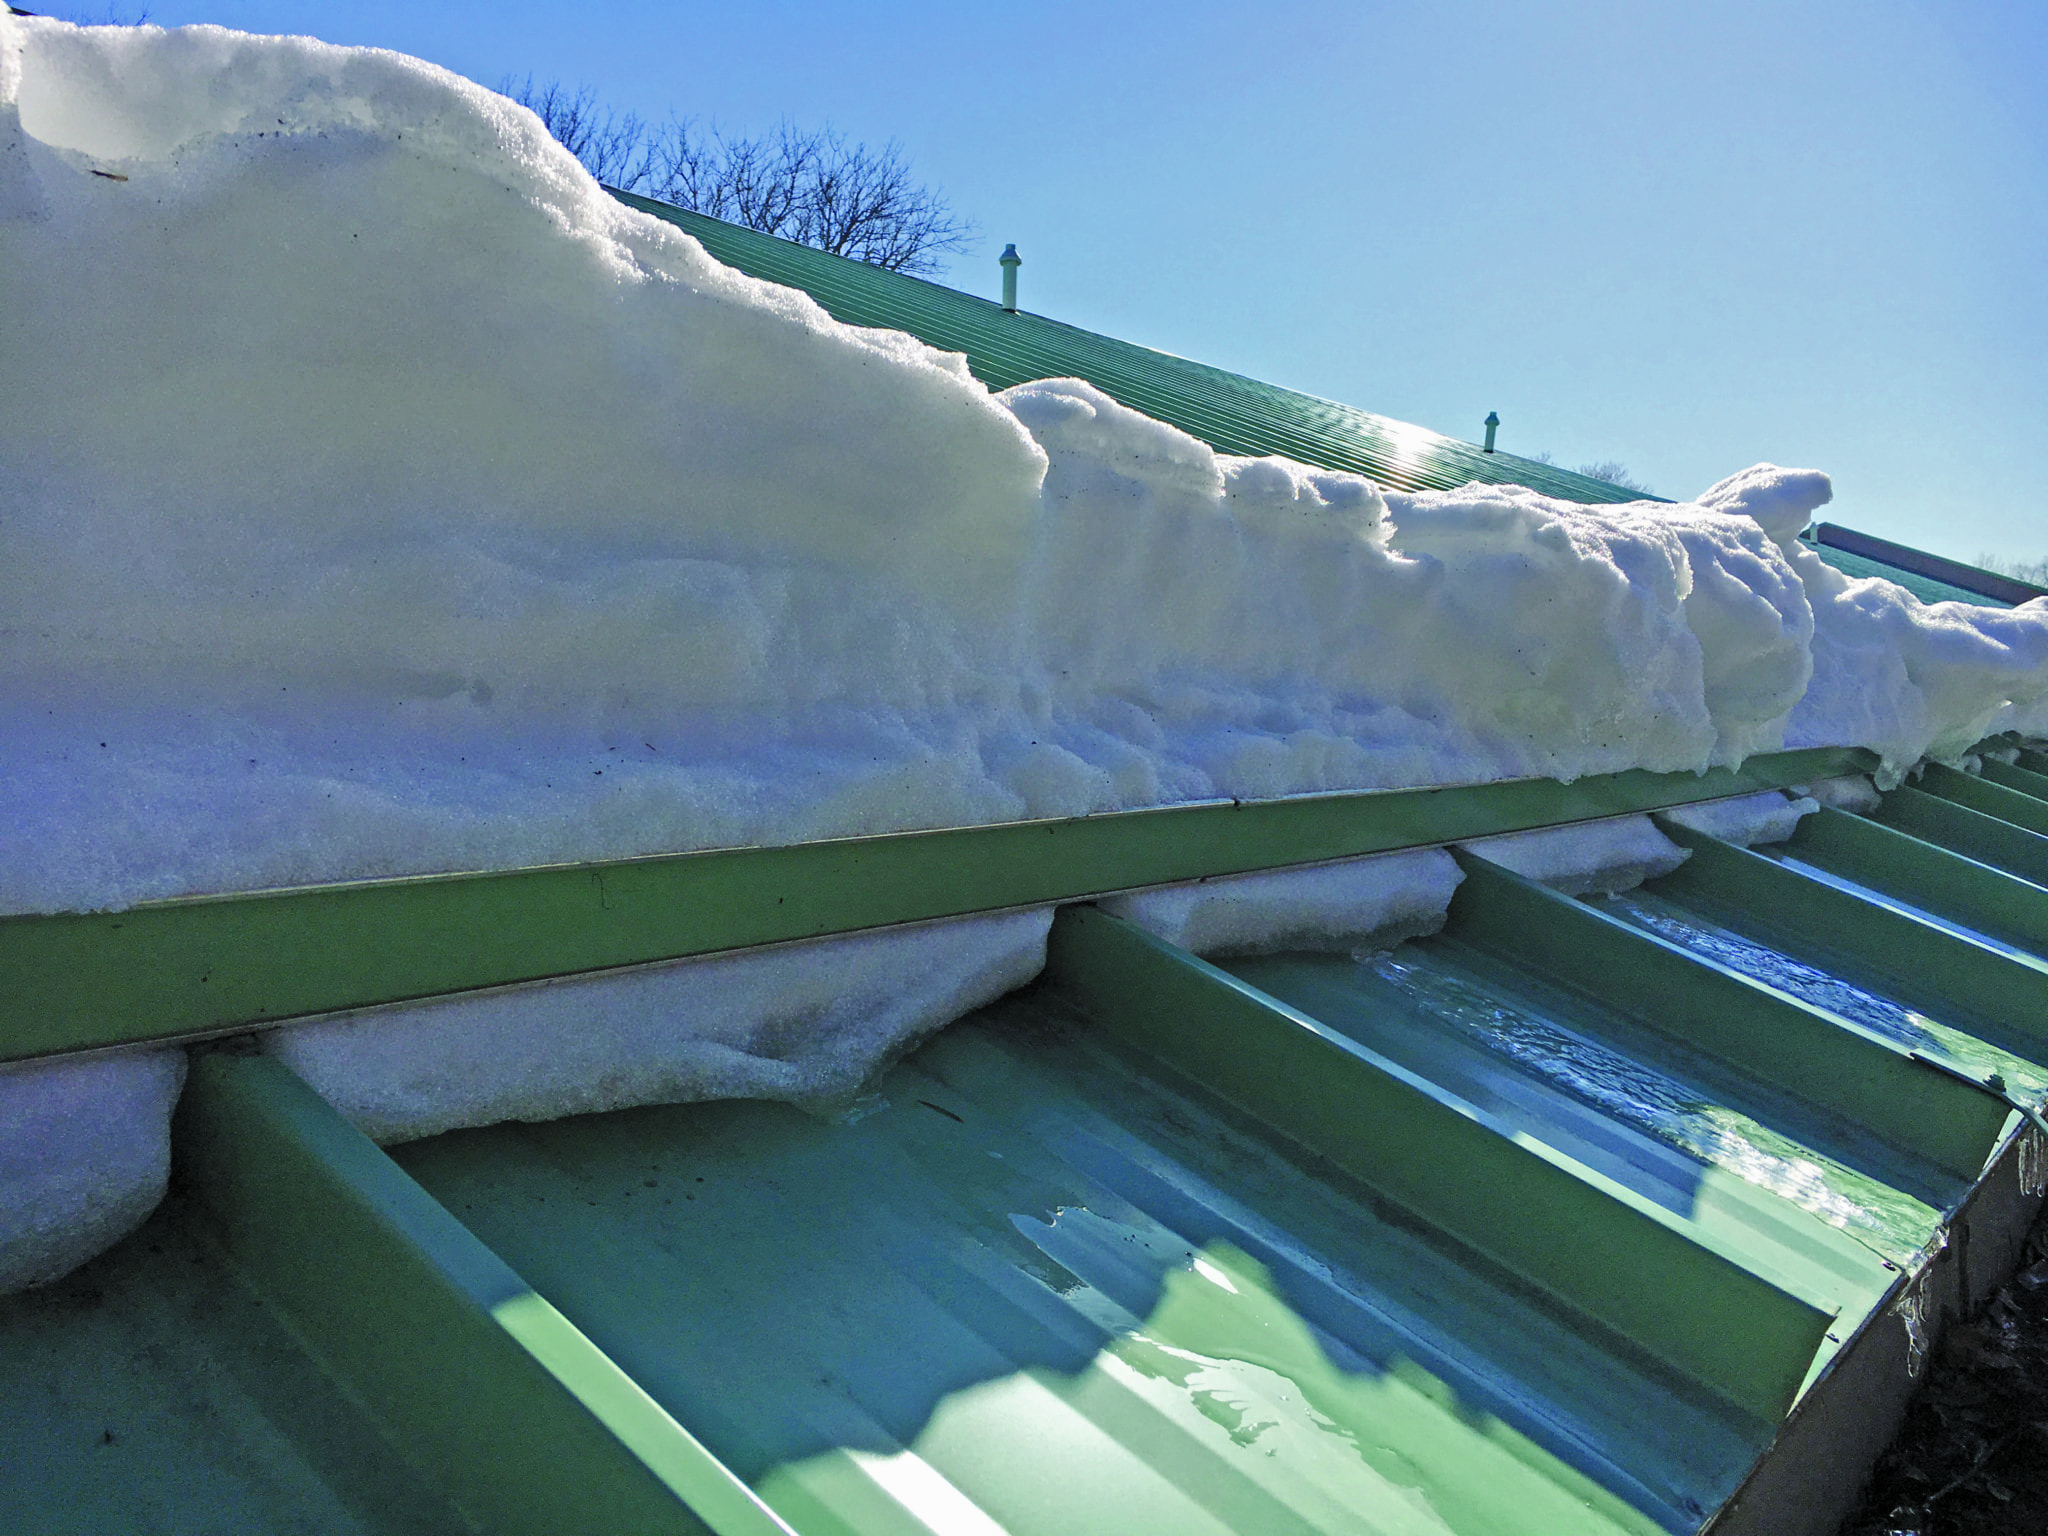 ColorGard snow guard roofing system - Preventing Ice Dams